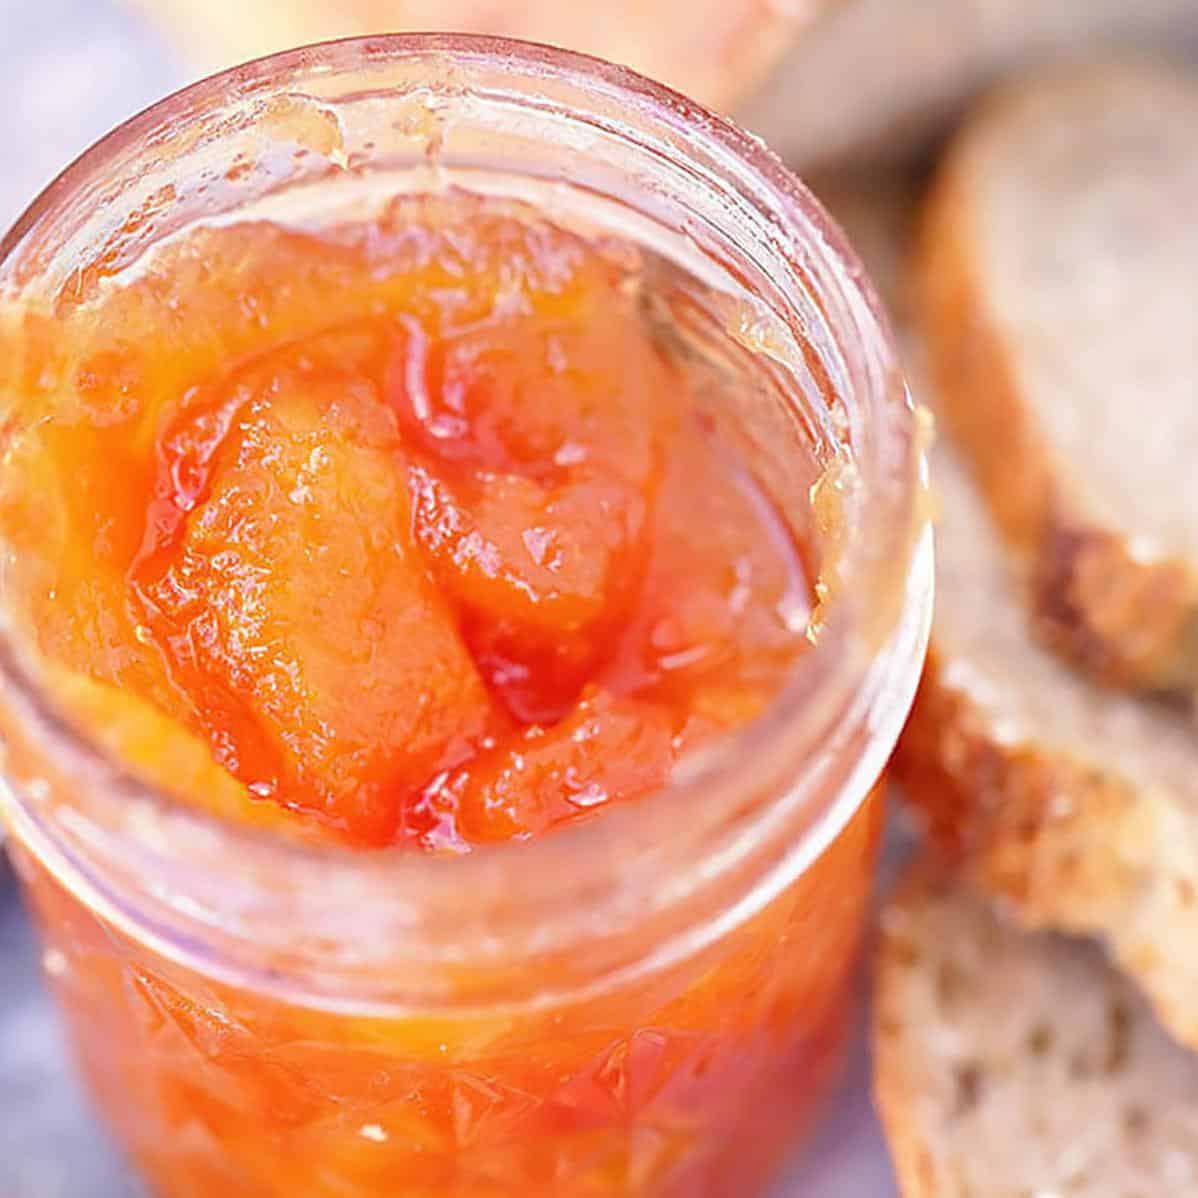  Five Corners and Pawpaw Jam: a taste of the tropics in every bite.